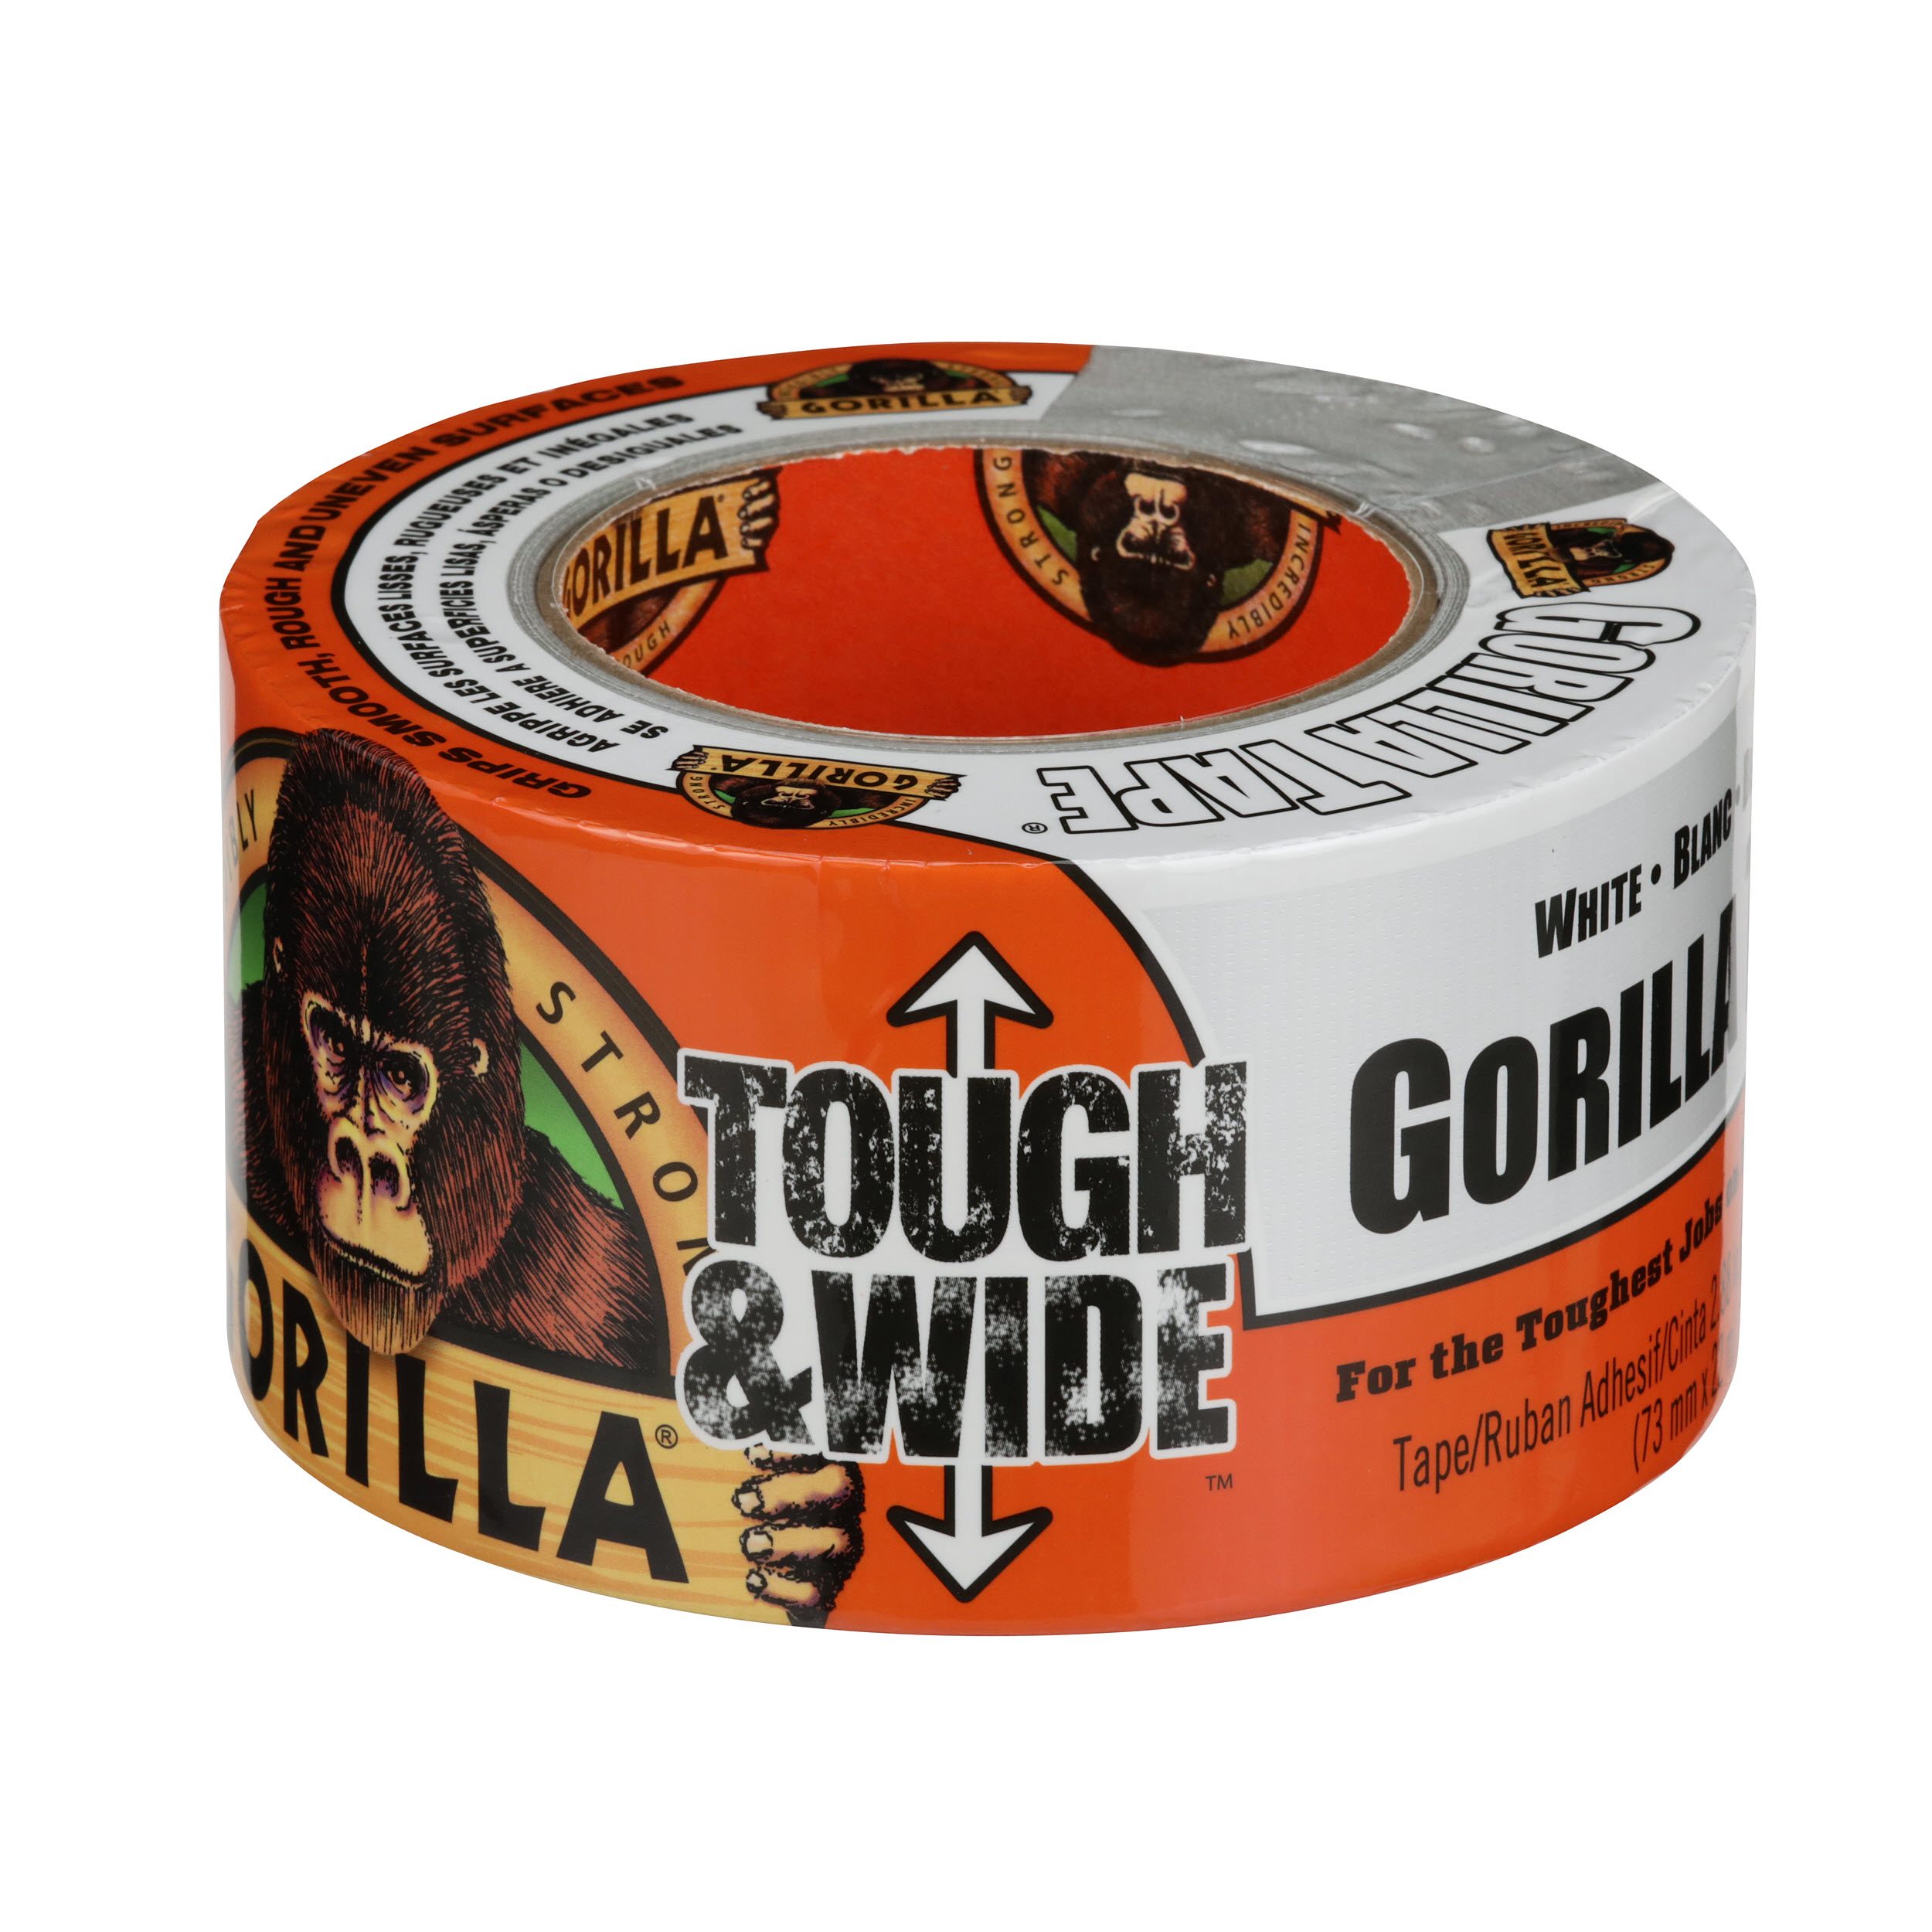 Gorilla Glue Double-Sided Tape, Gray Roll Assembled Product Weight 0.386 lb  